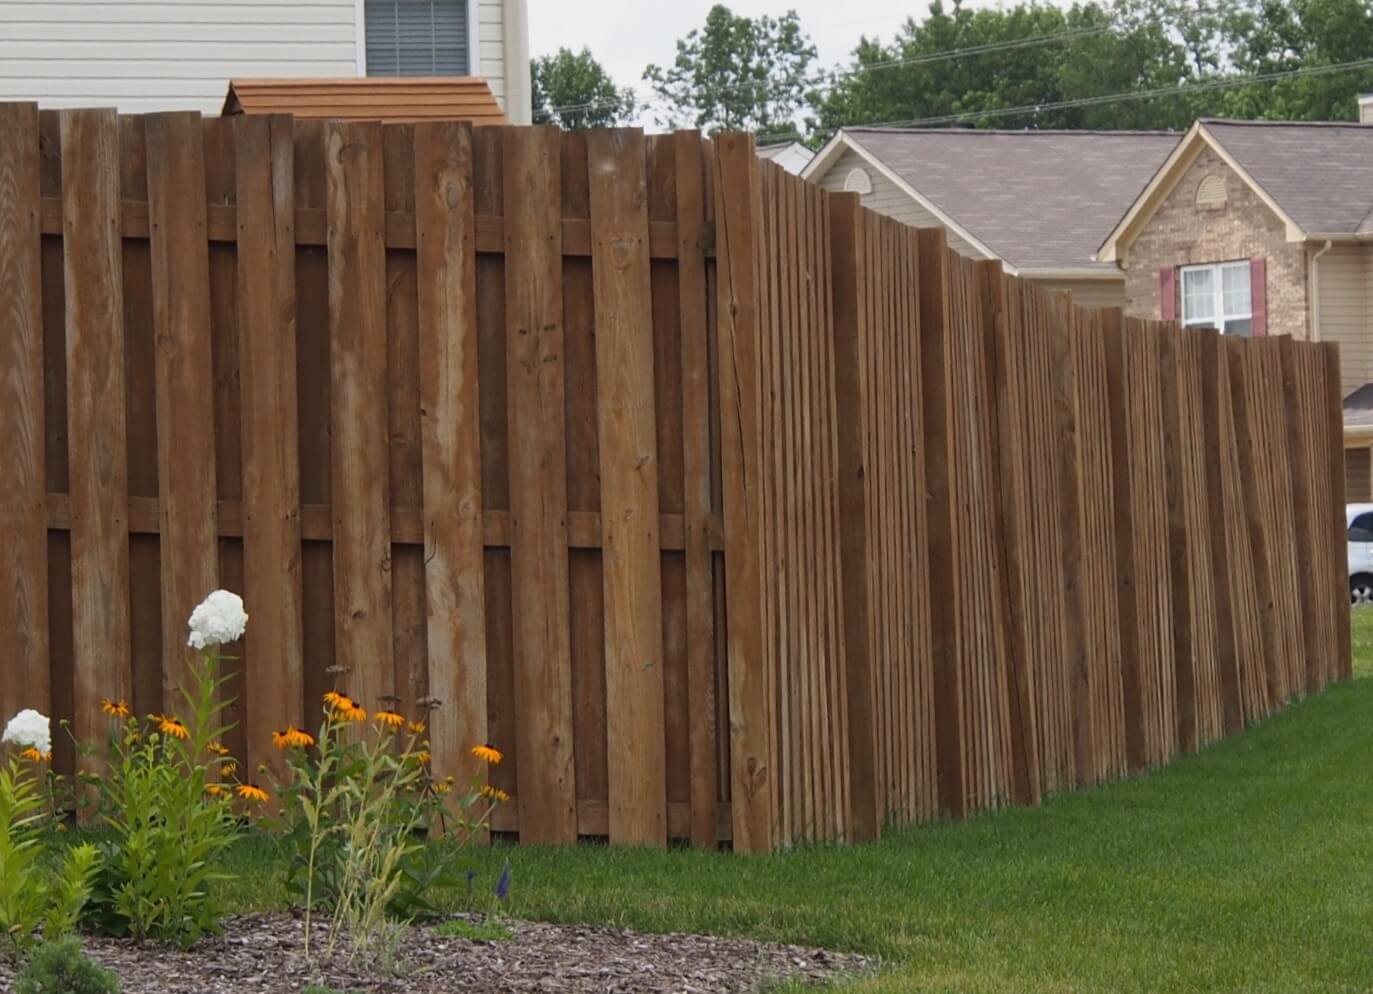 residential fence installation services in Indianapolis from Amerifence